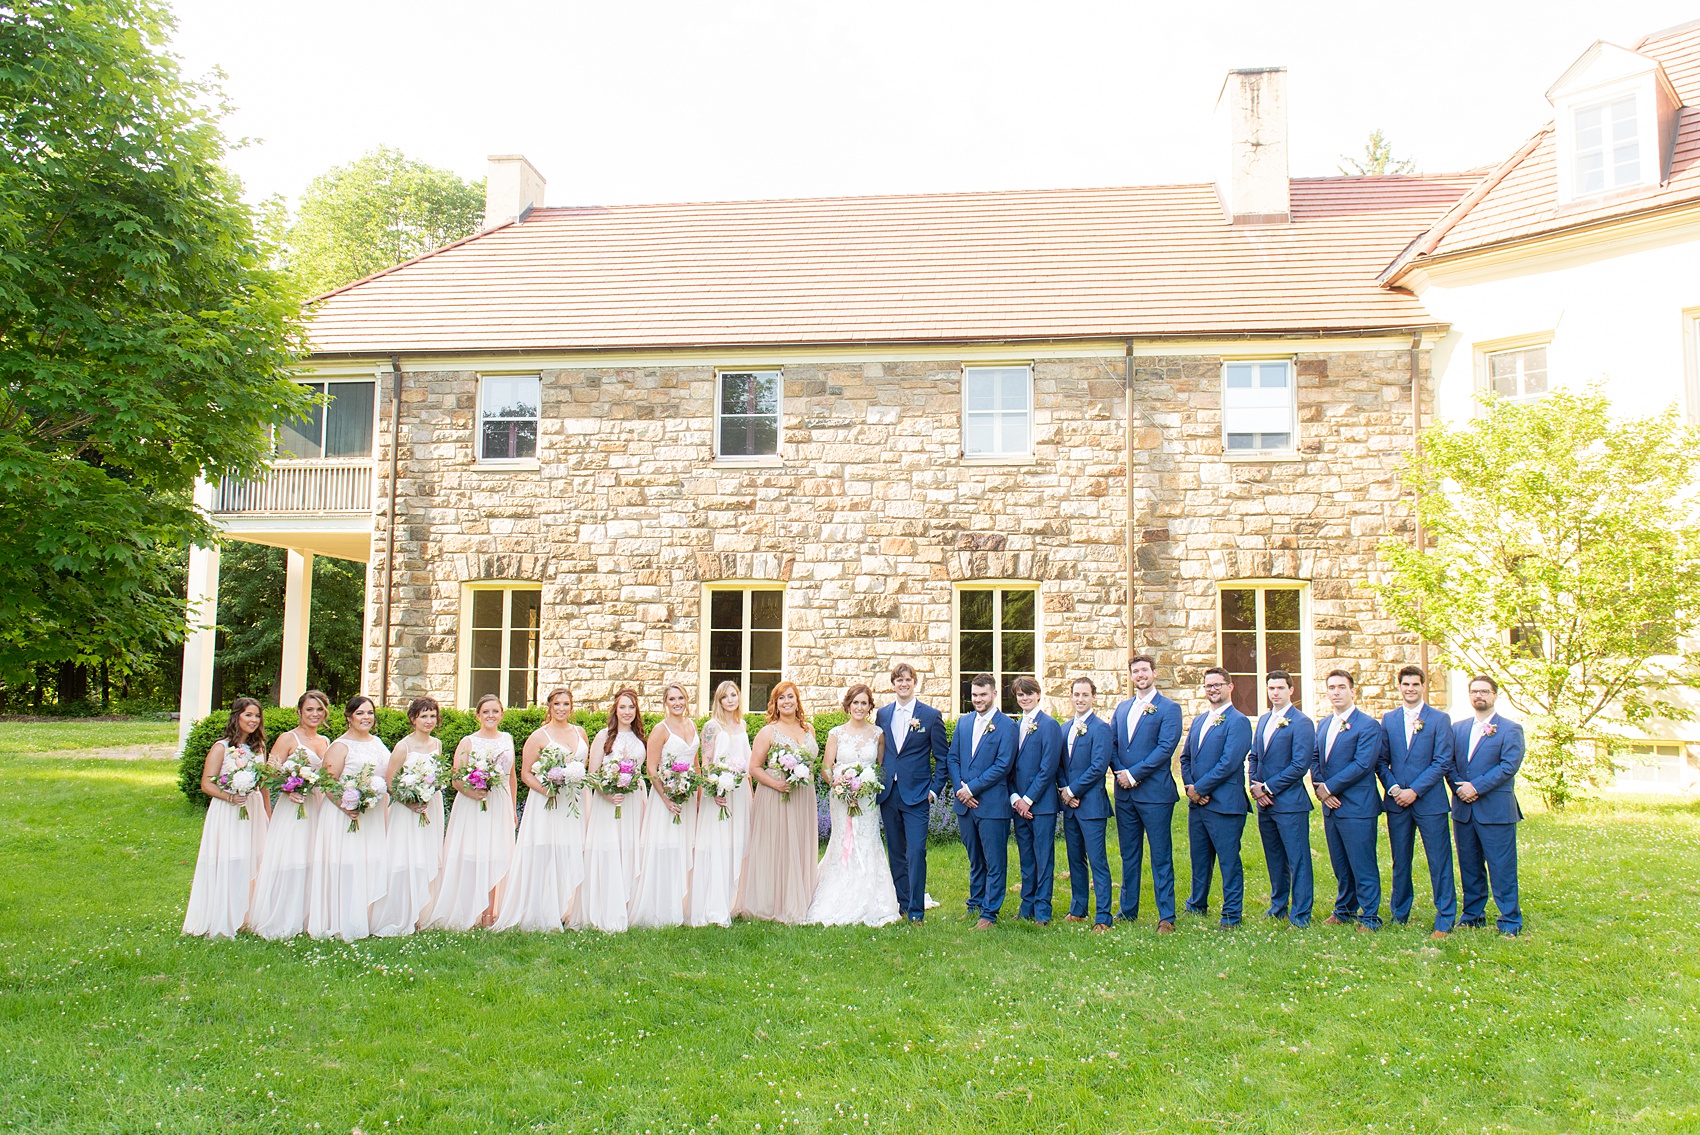 A summer wedding at Olde Mill Inn, NJ. Photos by Mikkel Paige Photography. This New Jersey venue is a great option for an event not too far from NYC. The wedding party photos were at nearby Cross Estate Gardens, a beautiful lush area for bridal party and groomsmen photos. The bridesmaids wore light pink, mis-matched gowns and the guys wore blue suits with pink ties. Click through for their complete wedding recap! #OldeMillInn #NJwedding #NJweddingphotographer #mikkelpaige #NewJerseyWeddingVenue #NewJerseyWedding #CrossEstateGardens #weddingdetails #bridalparty #pinkbridesmaids #mismatcheddresses #bluesuits #groomsmen